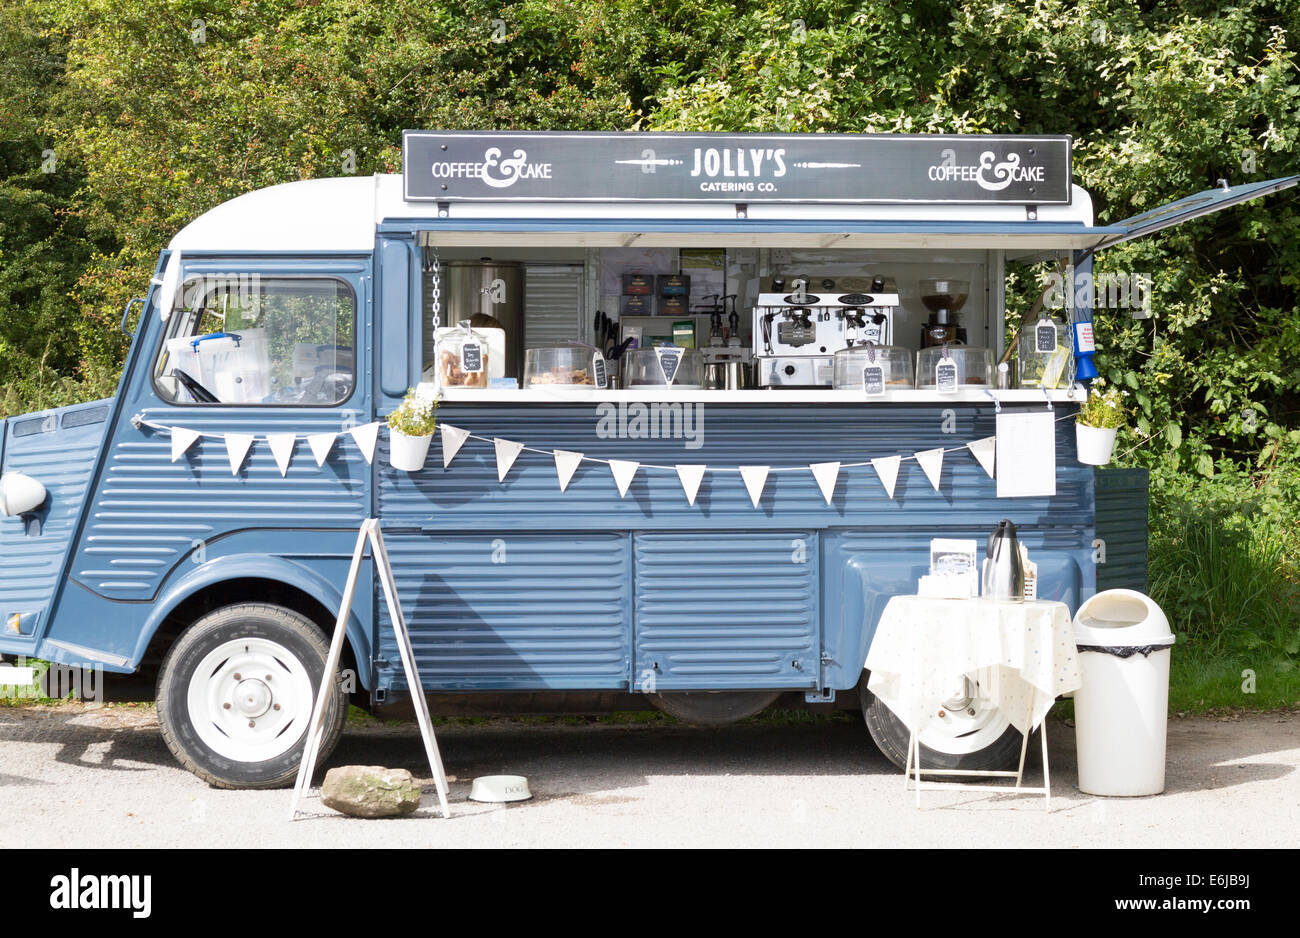 Jolly's cake and coffee van trading in a car park in Derbyshire Stock Photo